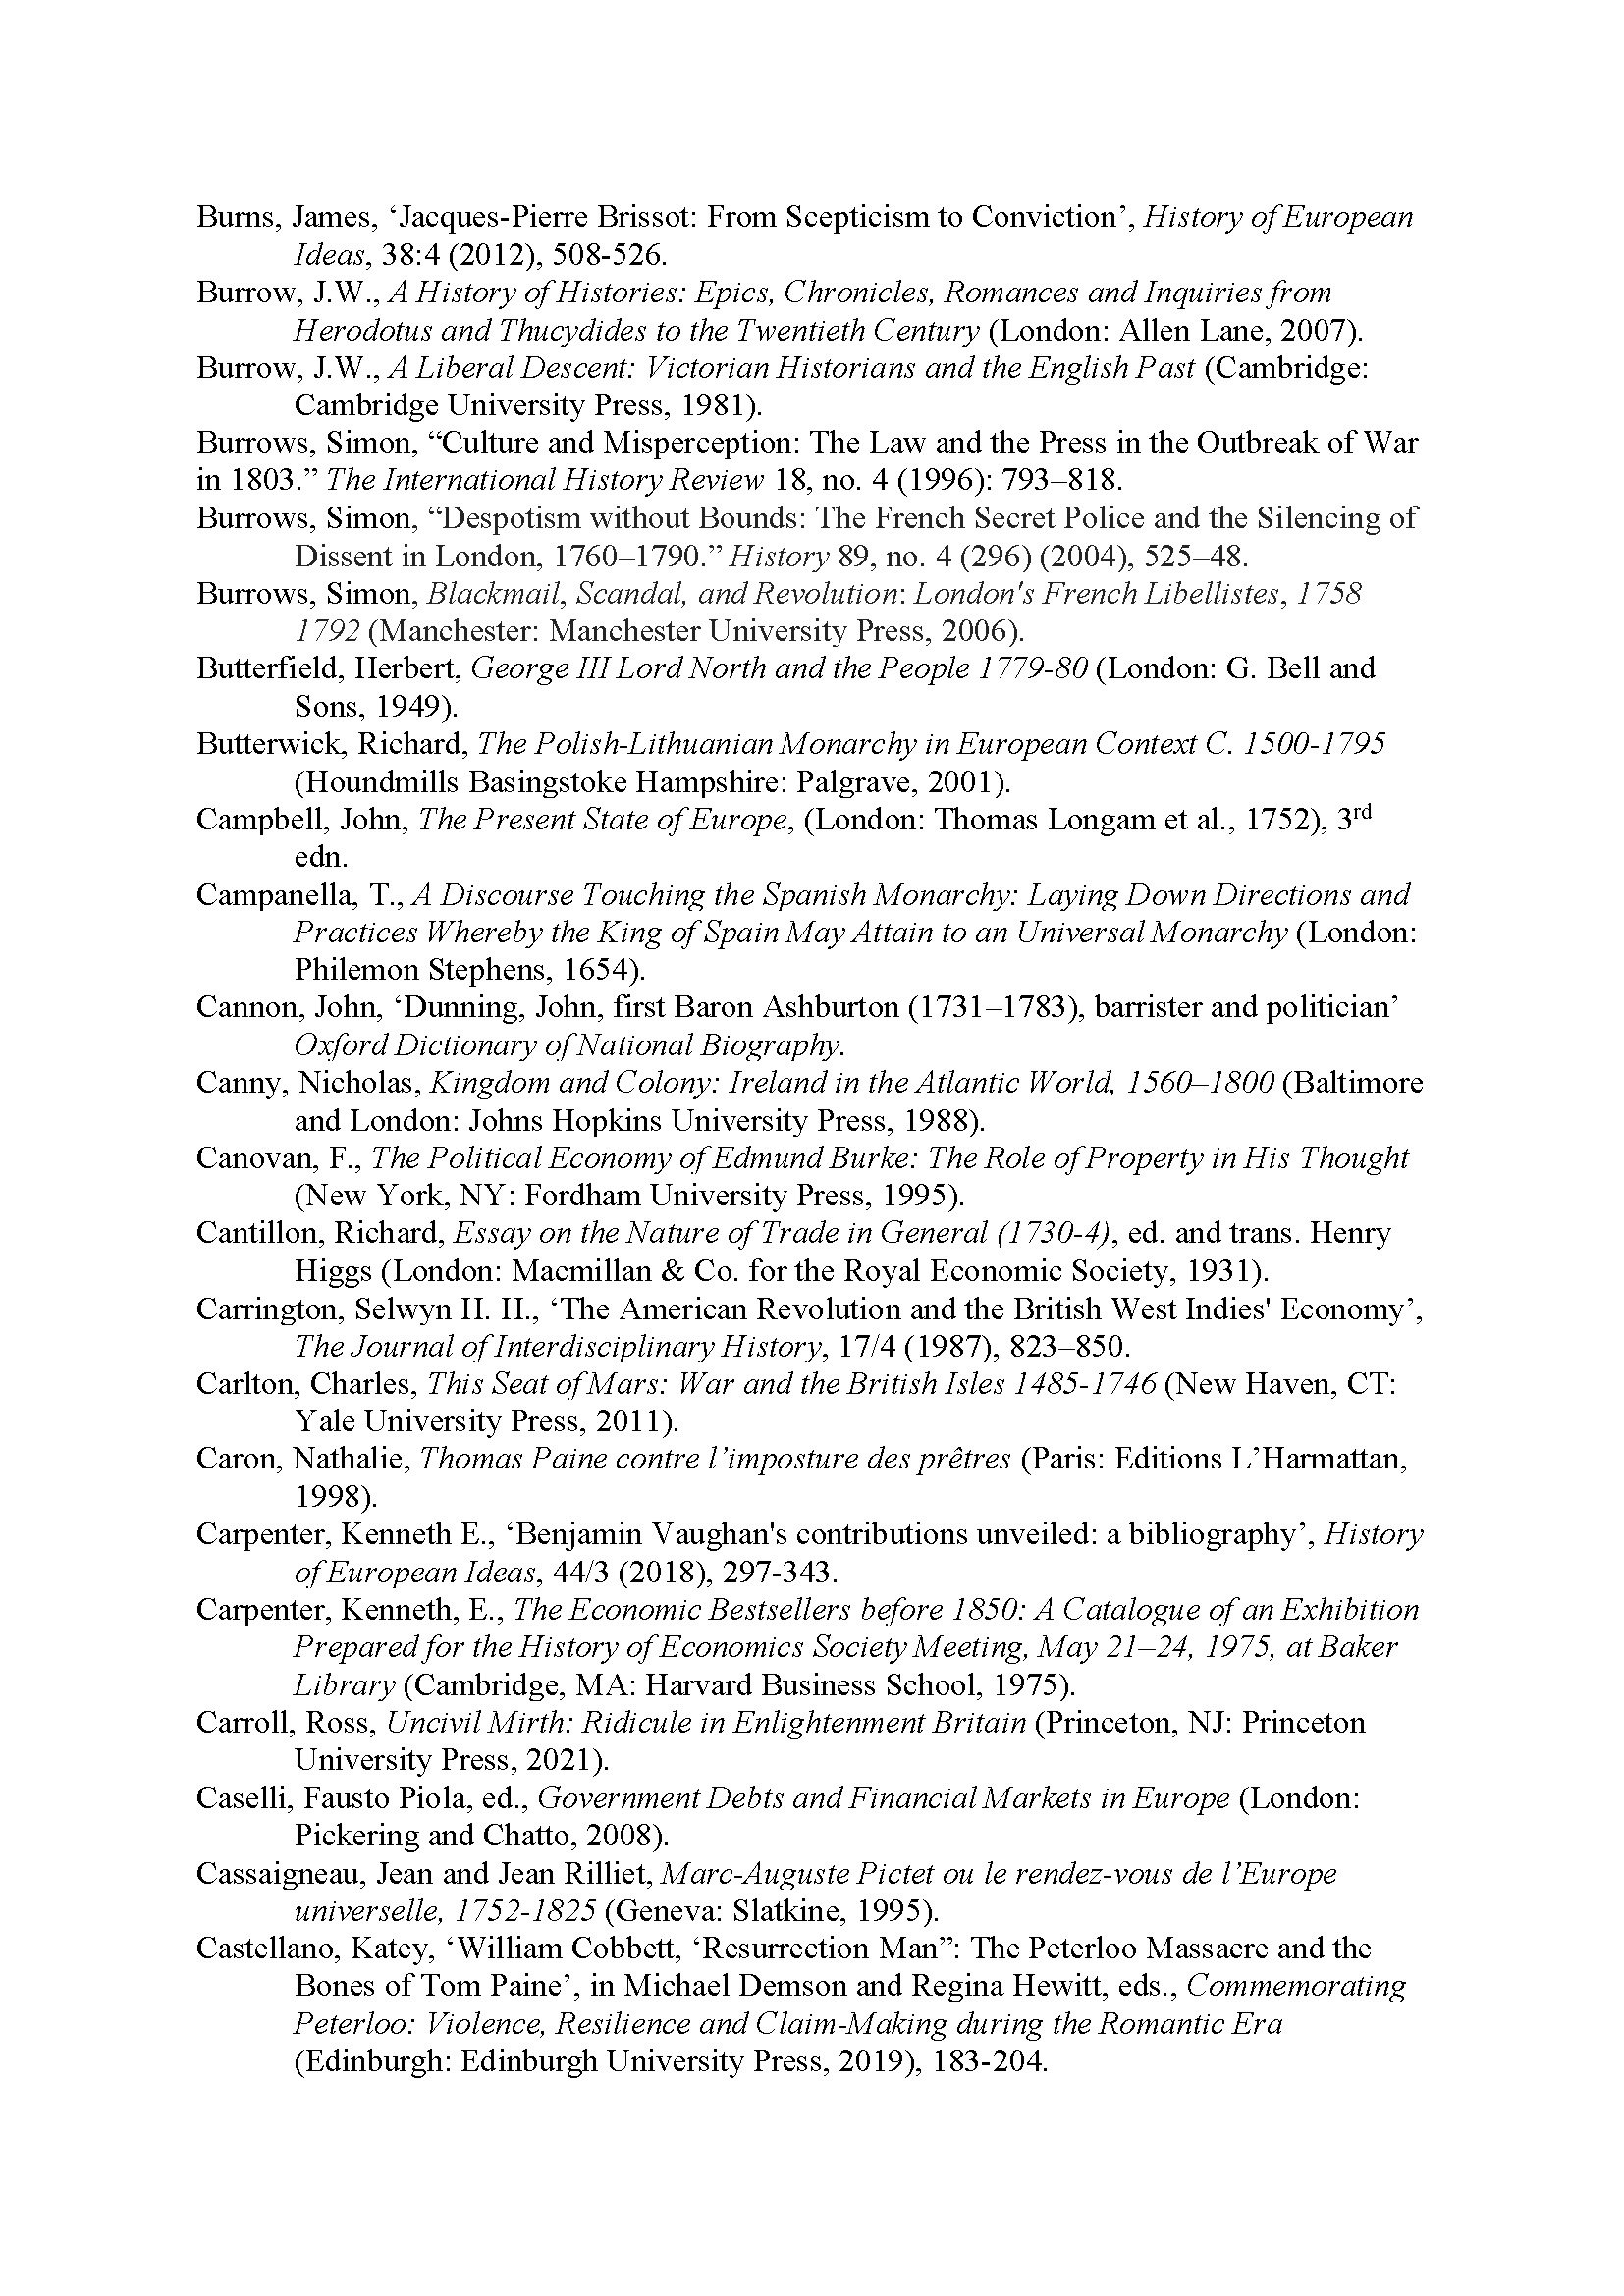 End of the Enlightment_Bibliography[25]_Page_08.jpg